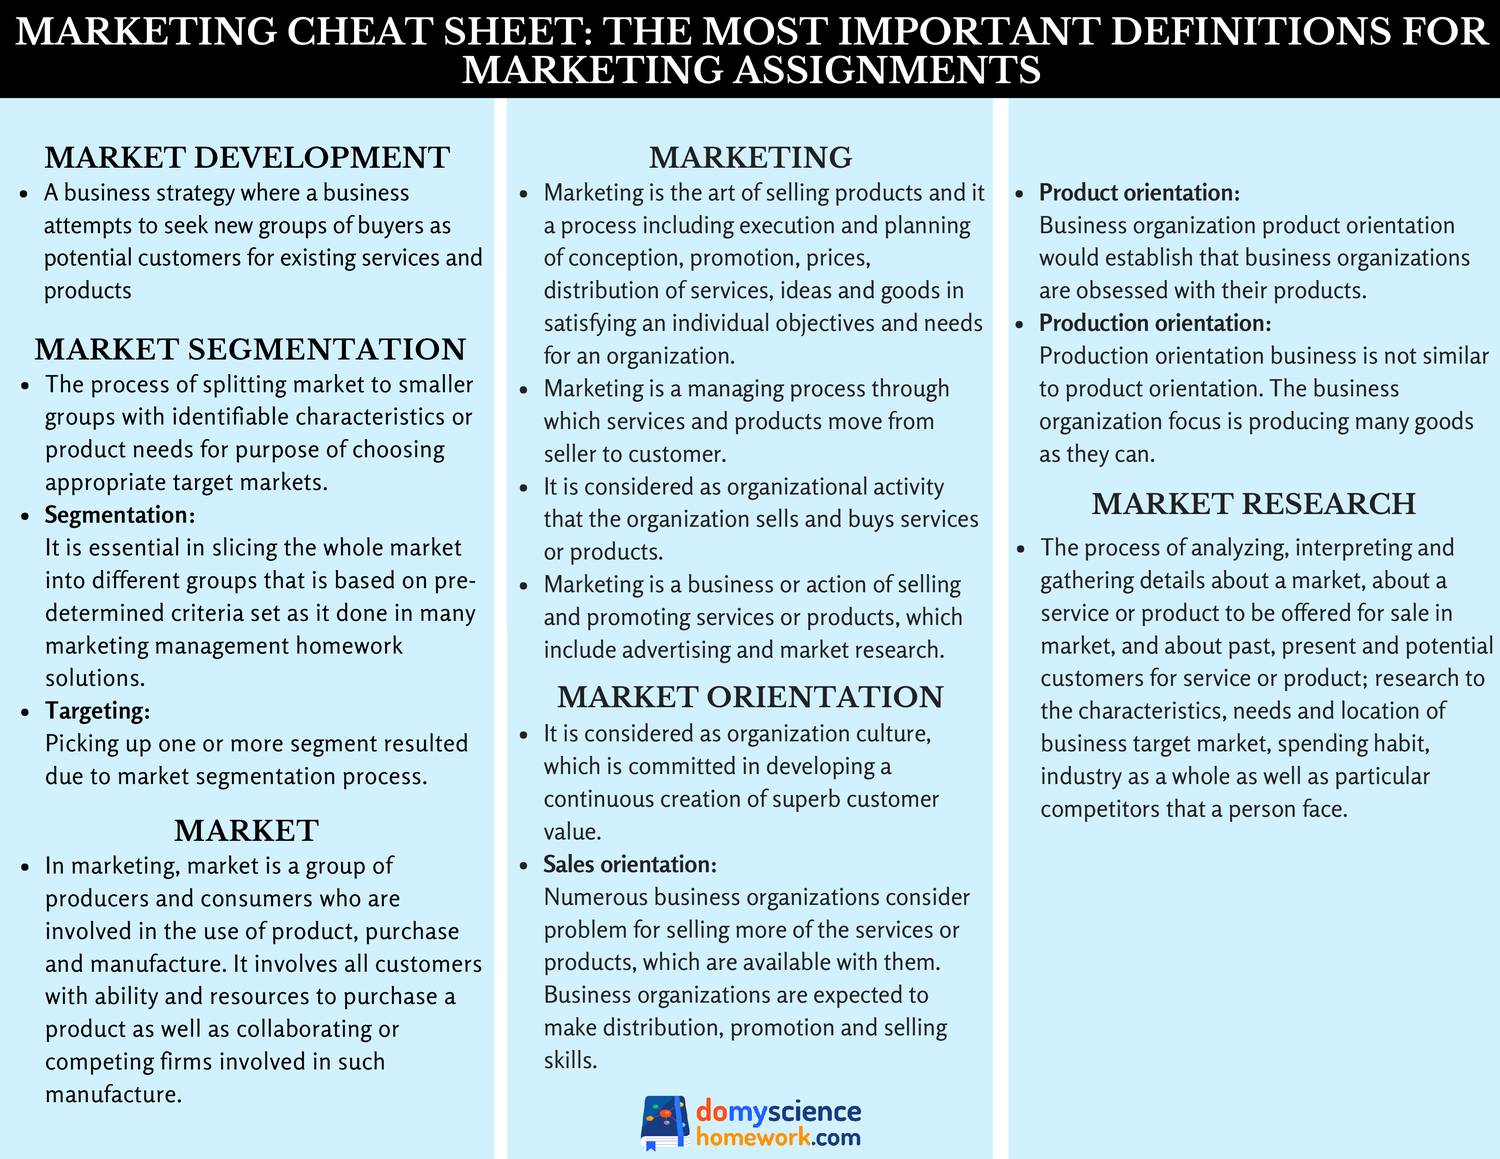 Marketing Cheat Sheet For Accountants & Bookkeepers [Free PDF]